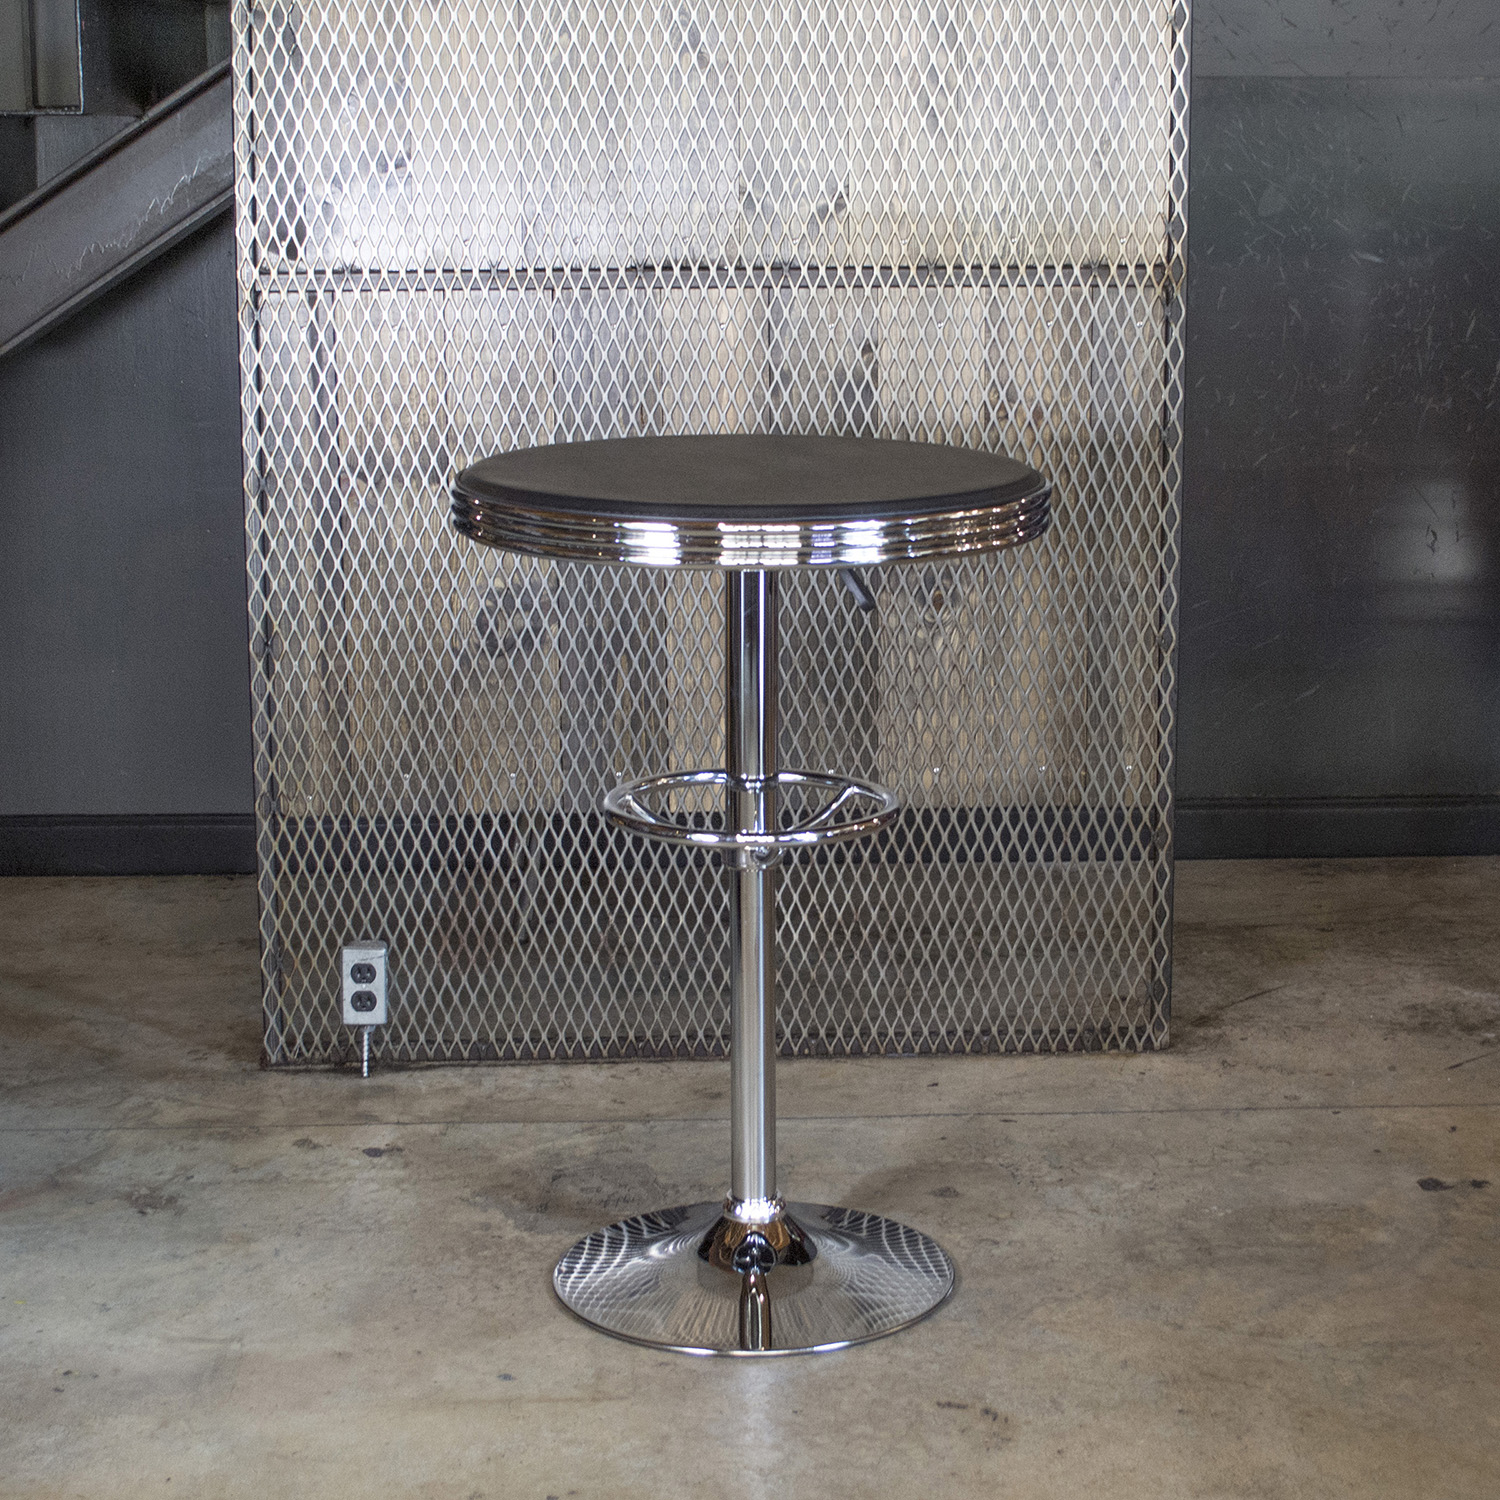 SFTABLE adjustable height works great with pub and bar stools.